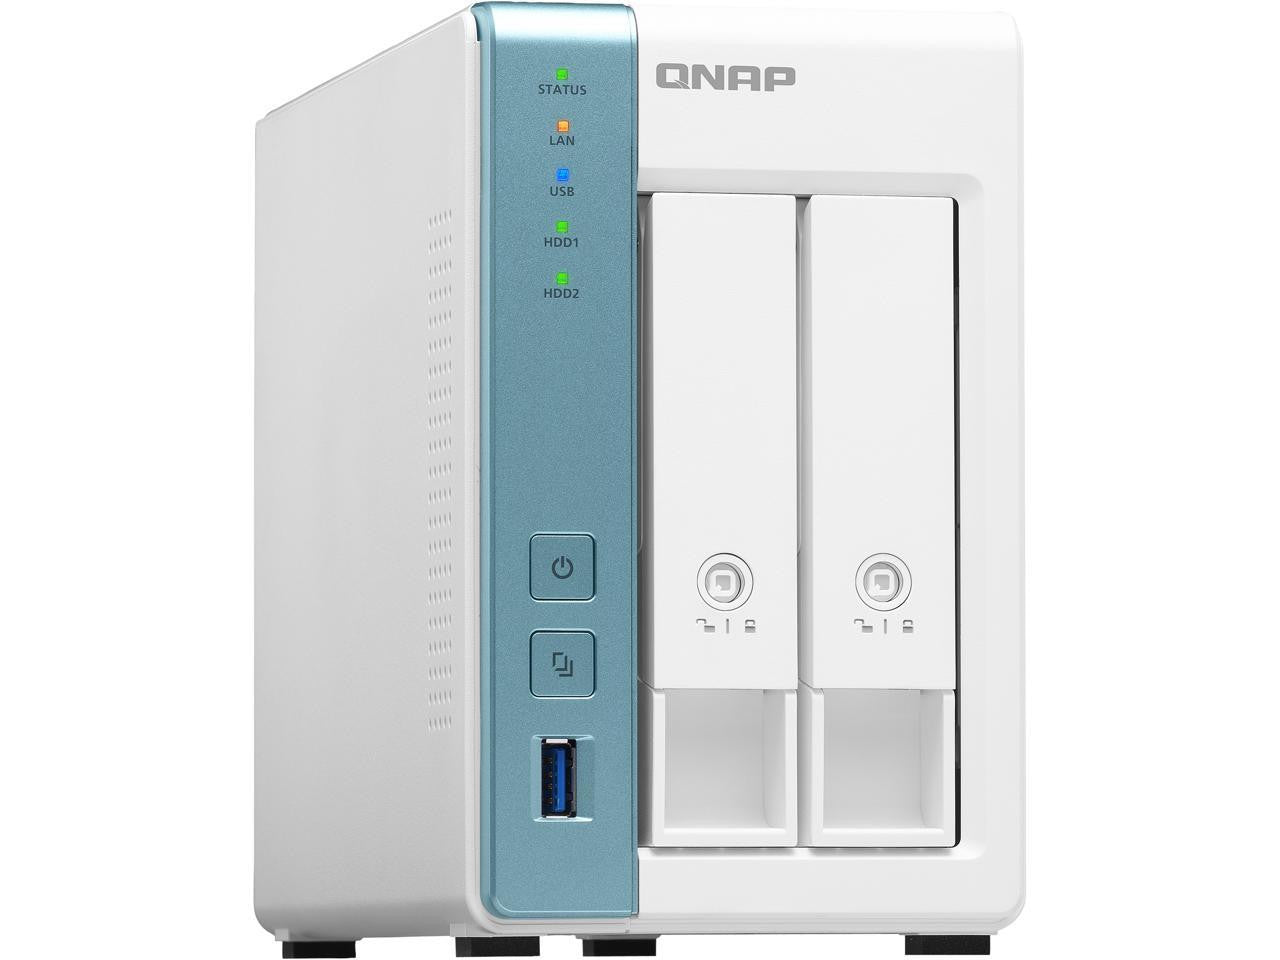 QNAP TS-231K 2-Bay Home NAS with 4TB (2 x 2TB) of Seagate Ironwolf NAS Drives Fully Assembled and Tested